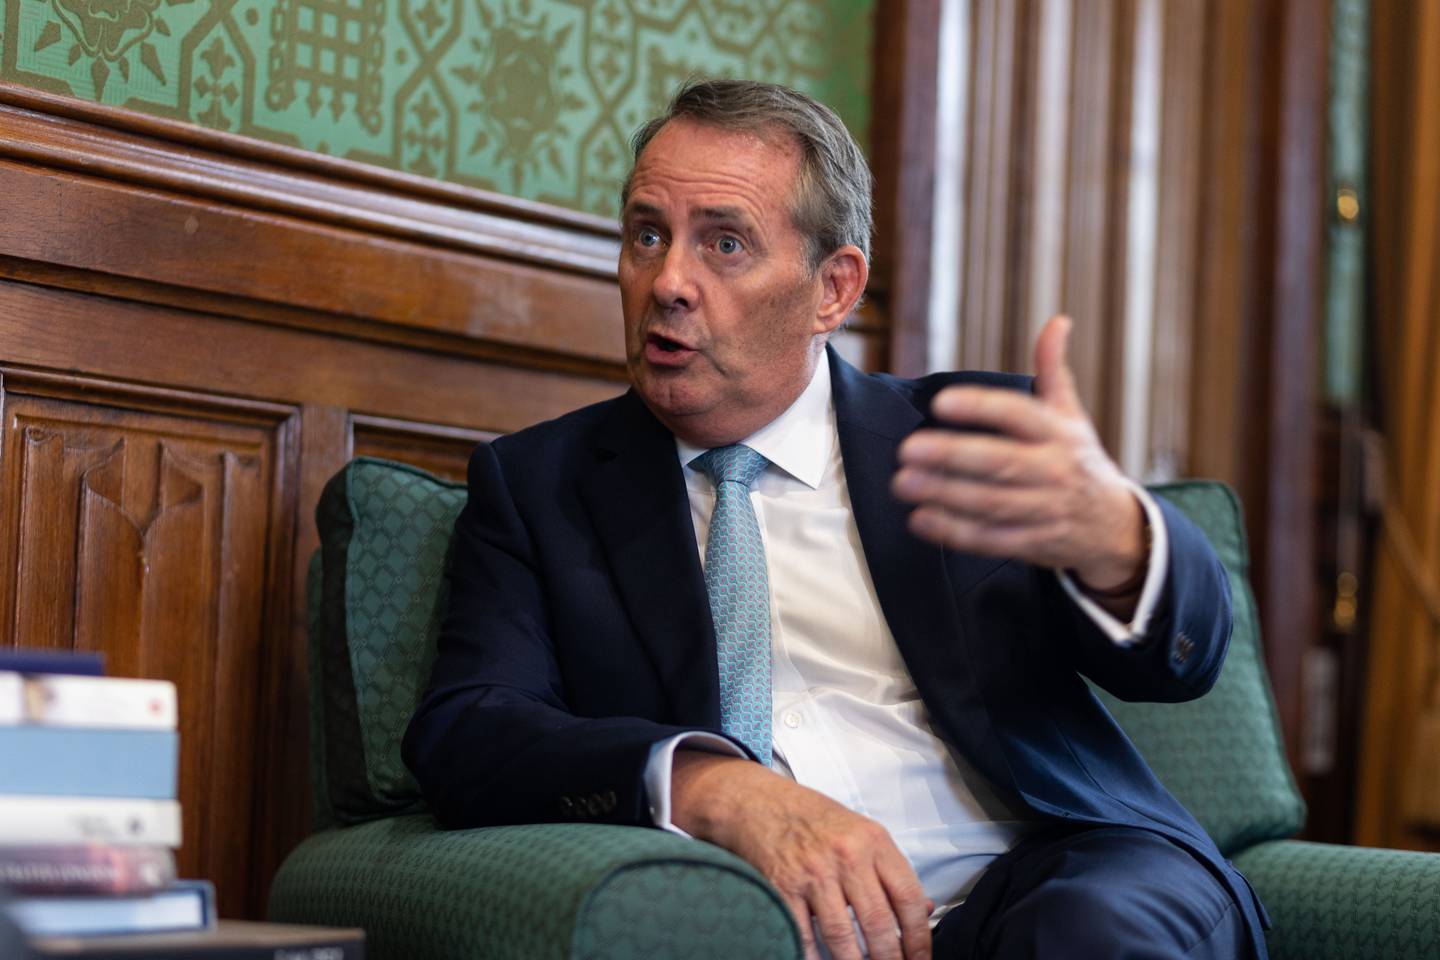 Liam Fox in his parliamentary office before hosting ambassadors from Israel, Bahrain and UAE. Mark Chilvers / The National